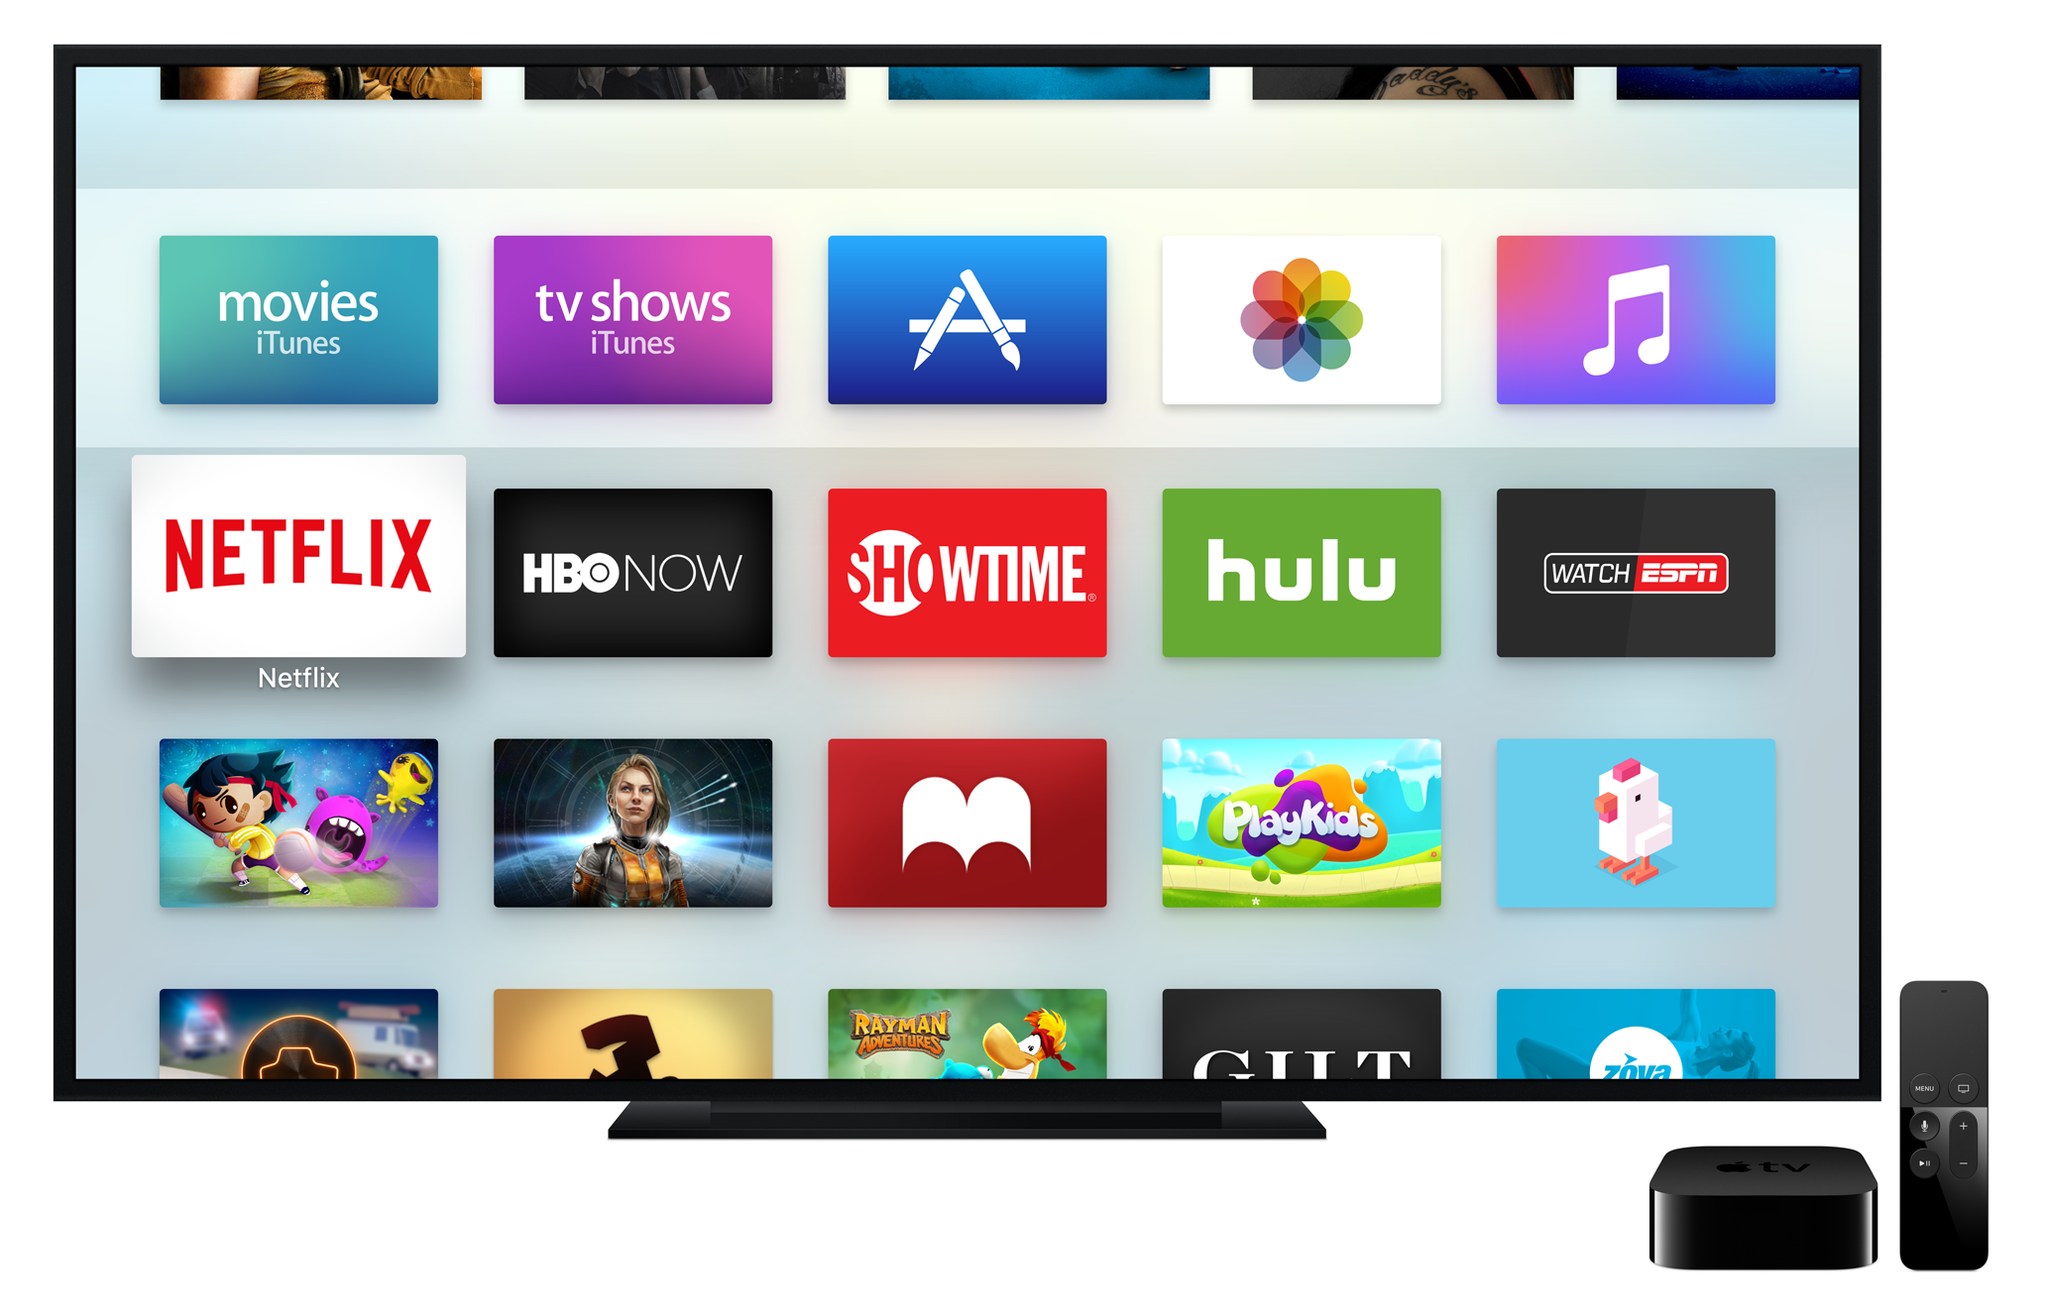 The new-look Apple TV is being well received. Image: Apple